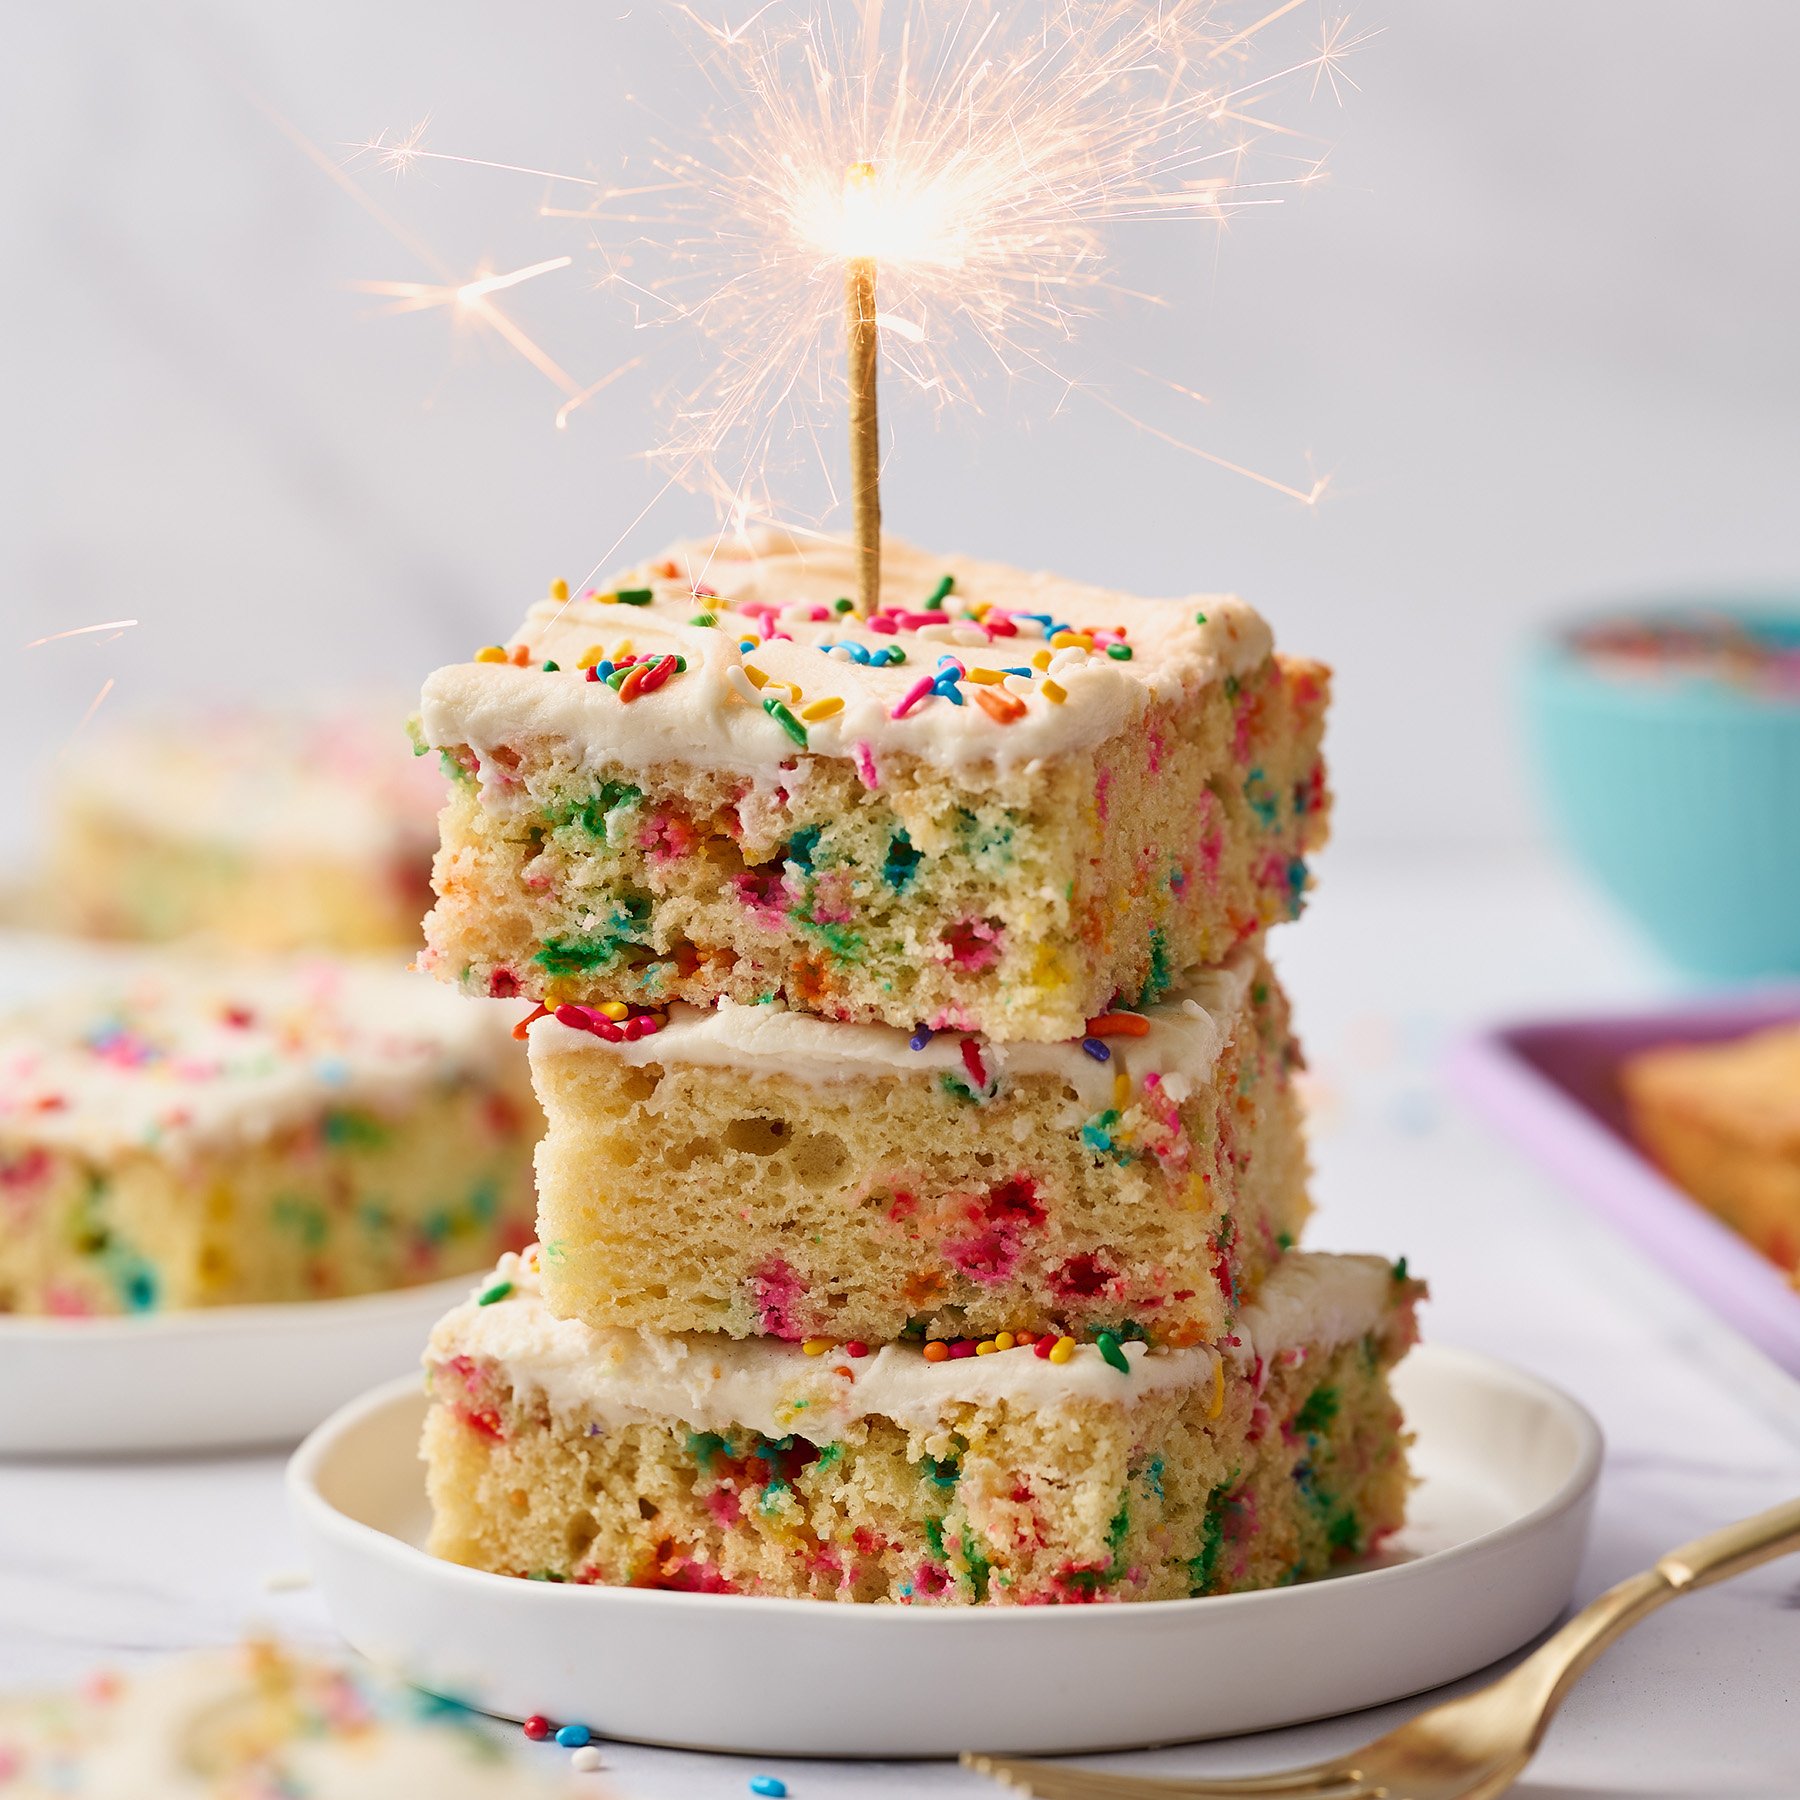 stack of three funfetti cake slices with a birthday sparkler candle lit on top